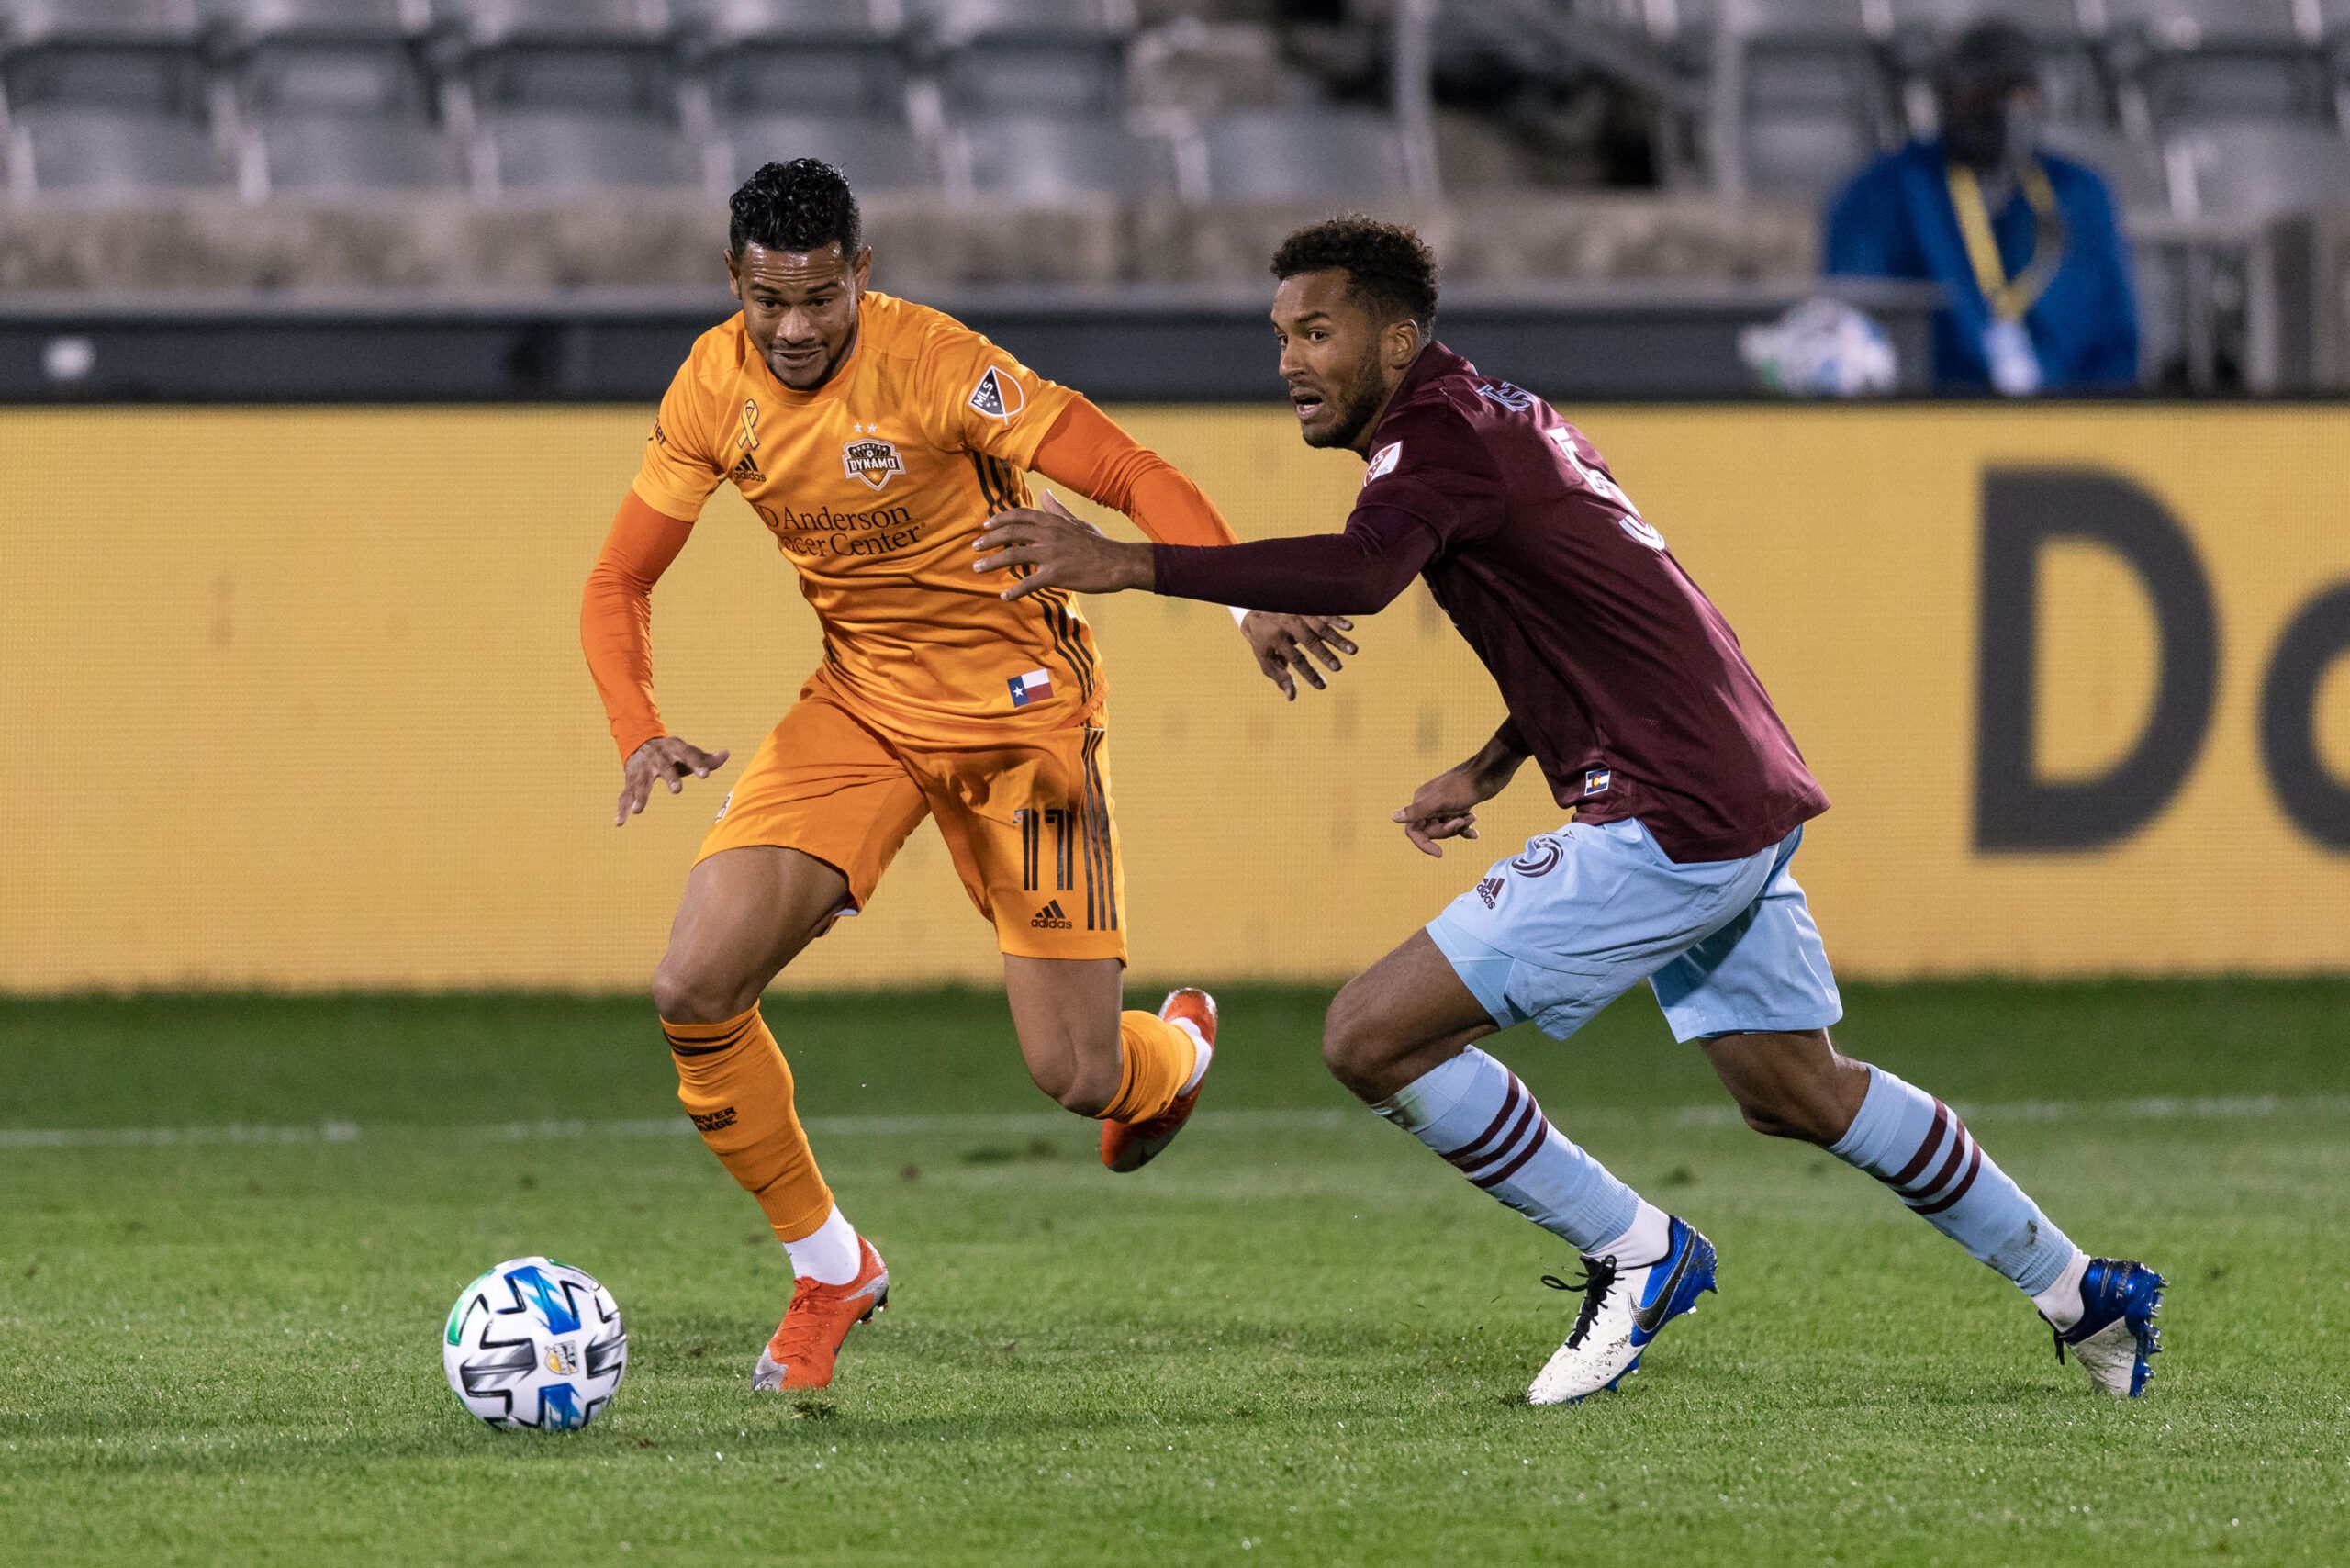 Sep 9, 2020; Commerce City, Colorado, USA; Houston Dynamo forward Ariel Lassiter (11) and Colorado Rapids defender Auston Trusty (5) battle for the ball in the second half at Dick's Sporting Goods Park. Mandatory Credit: Isaiah J. Downing-USA TODAY Sports